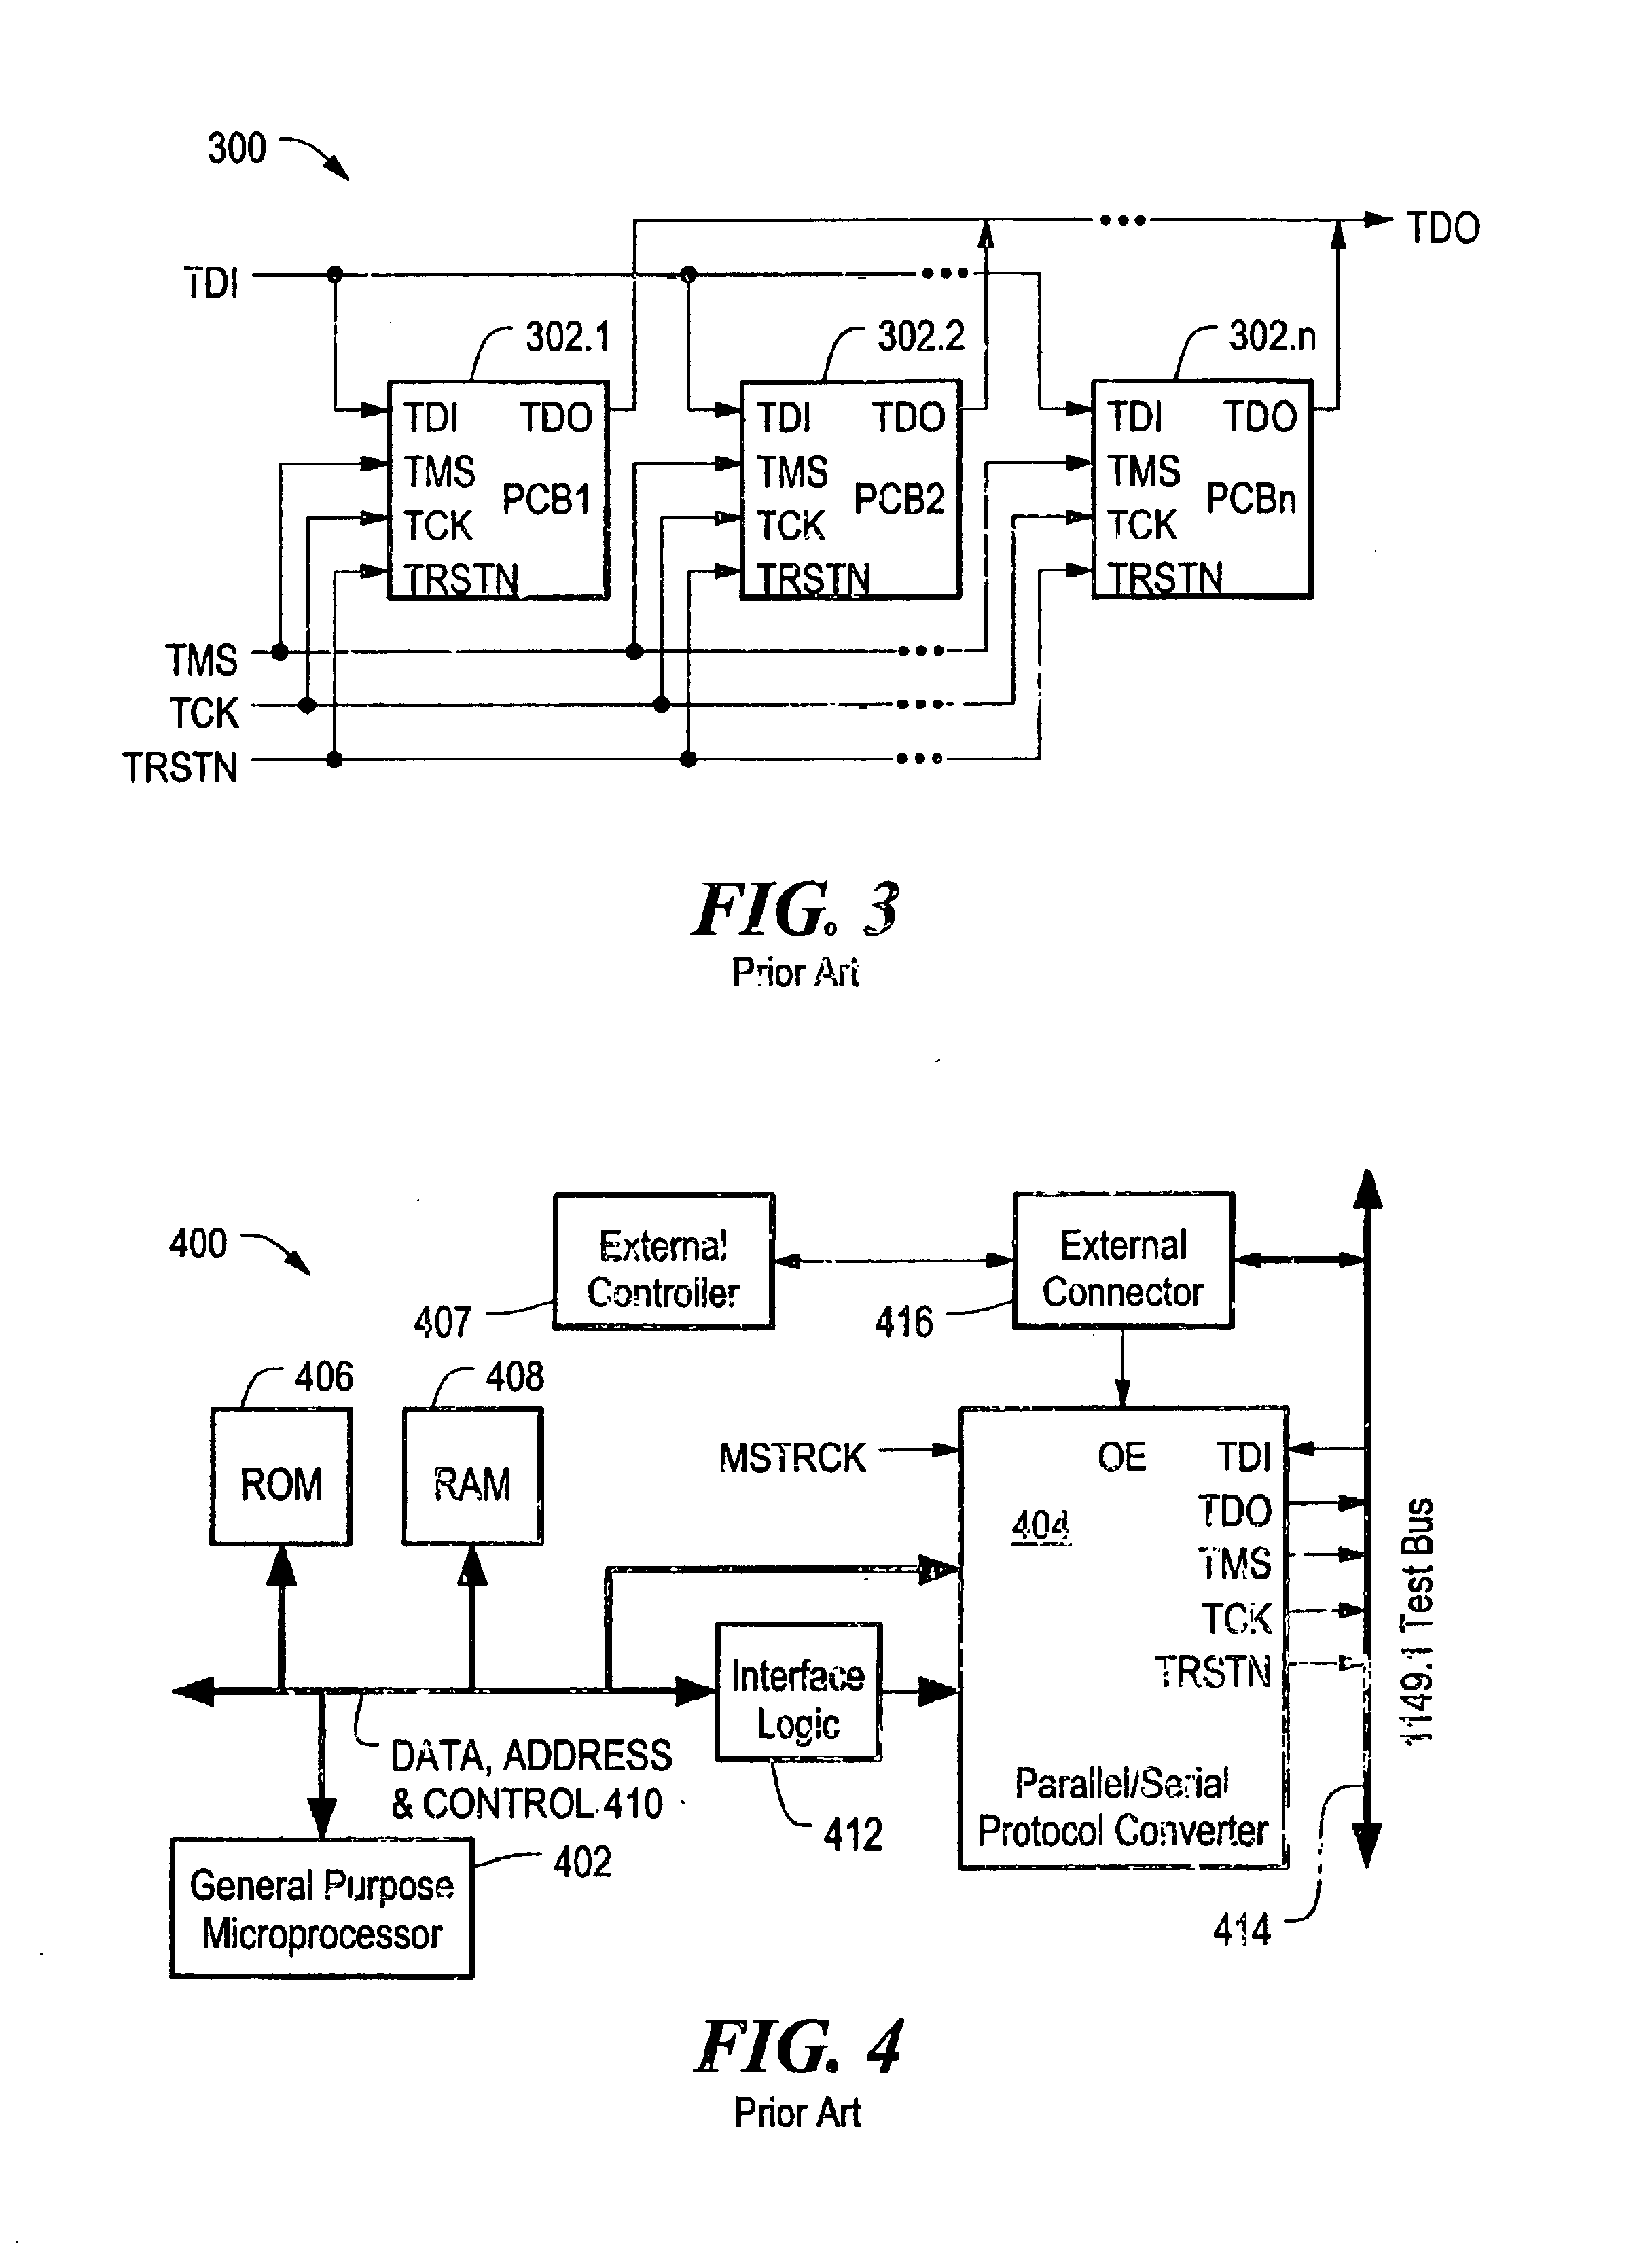 Method and apparatus for embedded built-in self-test (BIST) of electronic circuits and systems